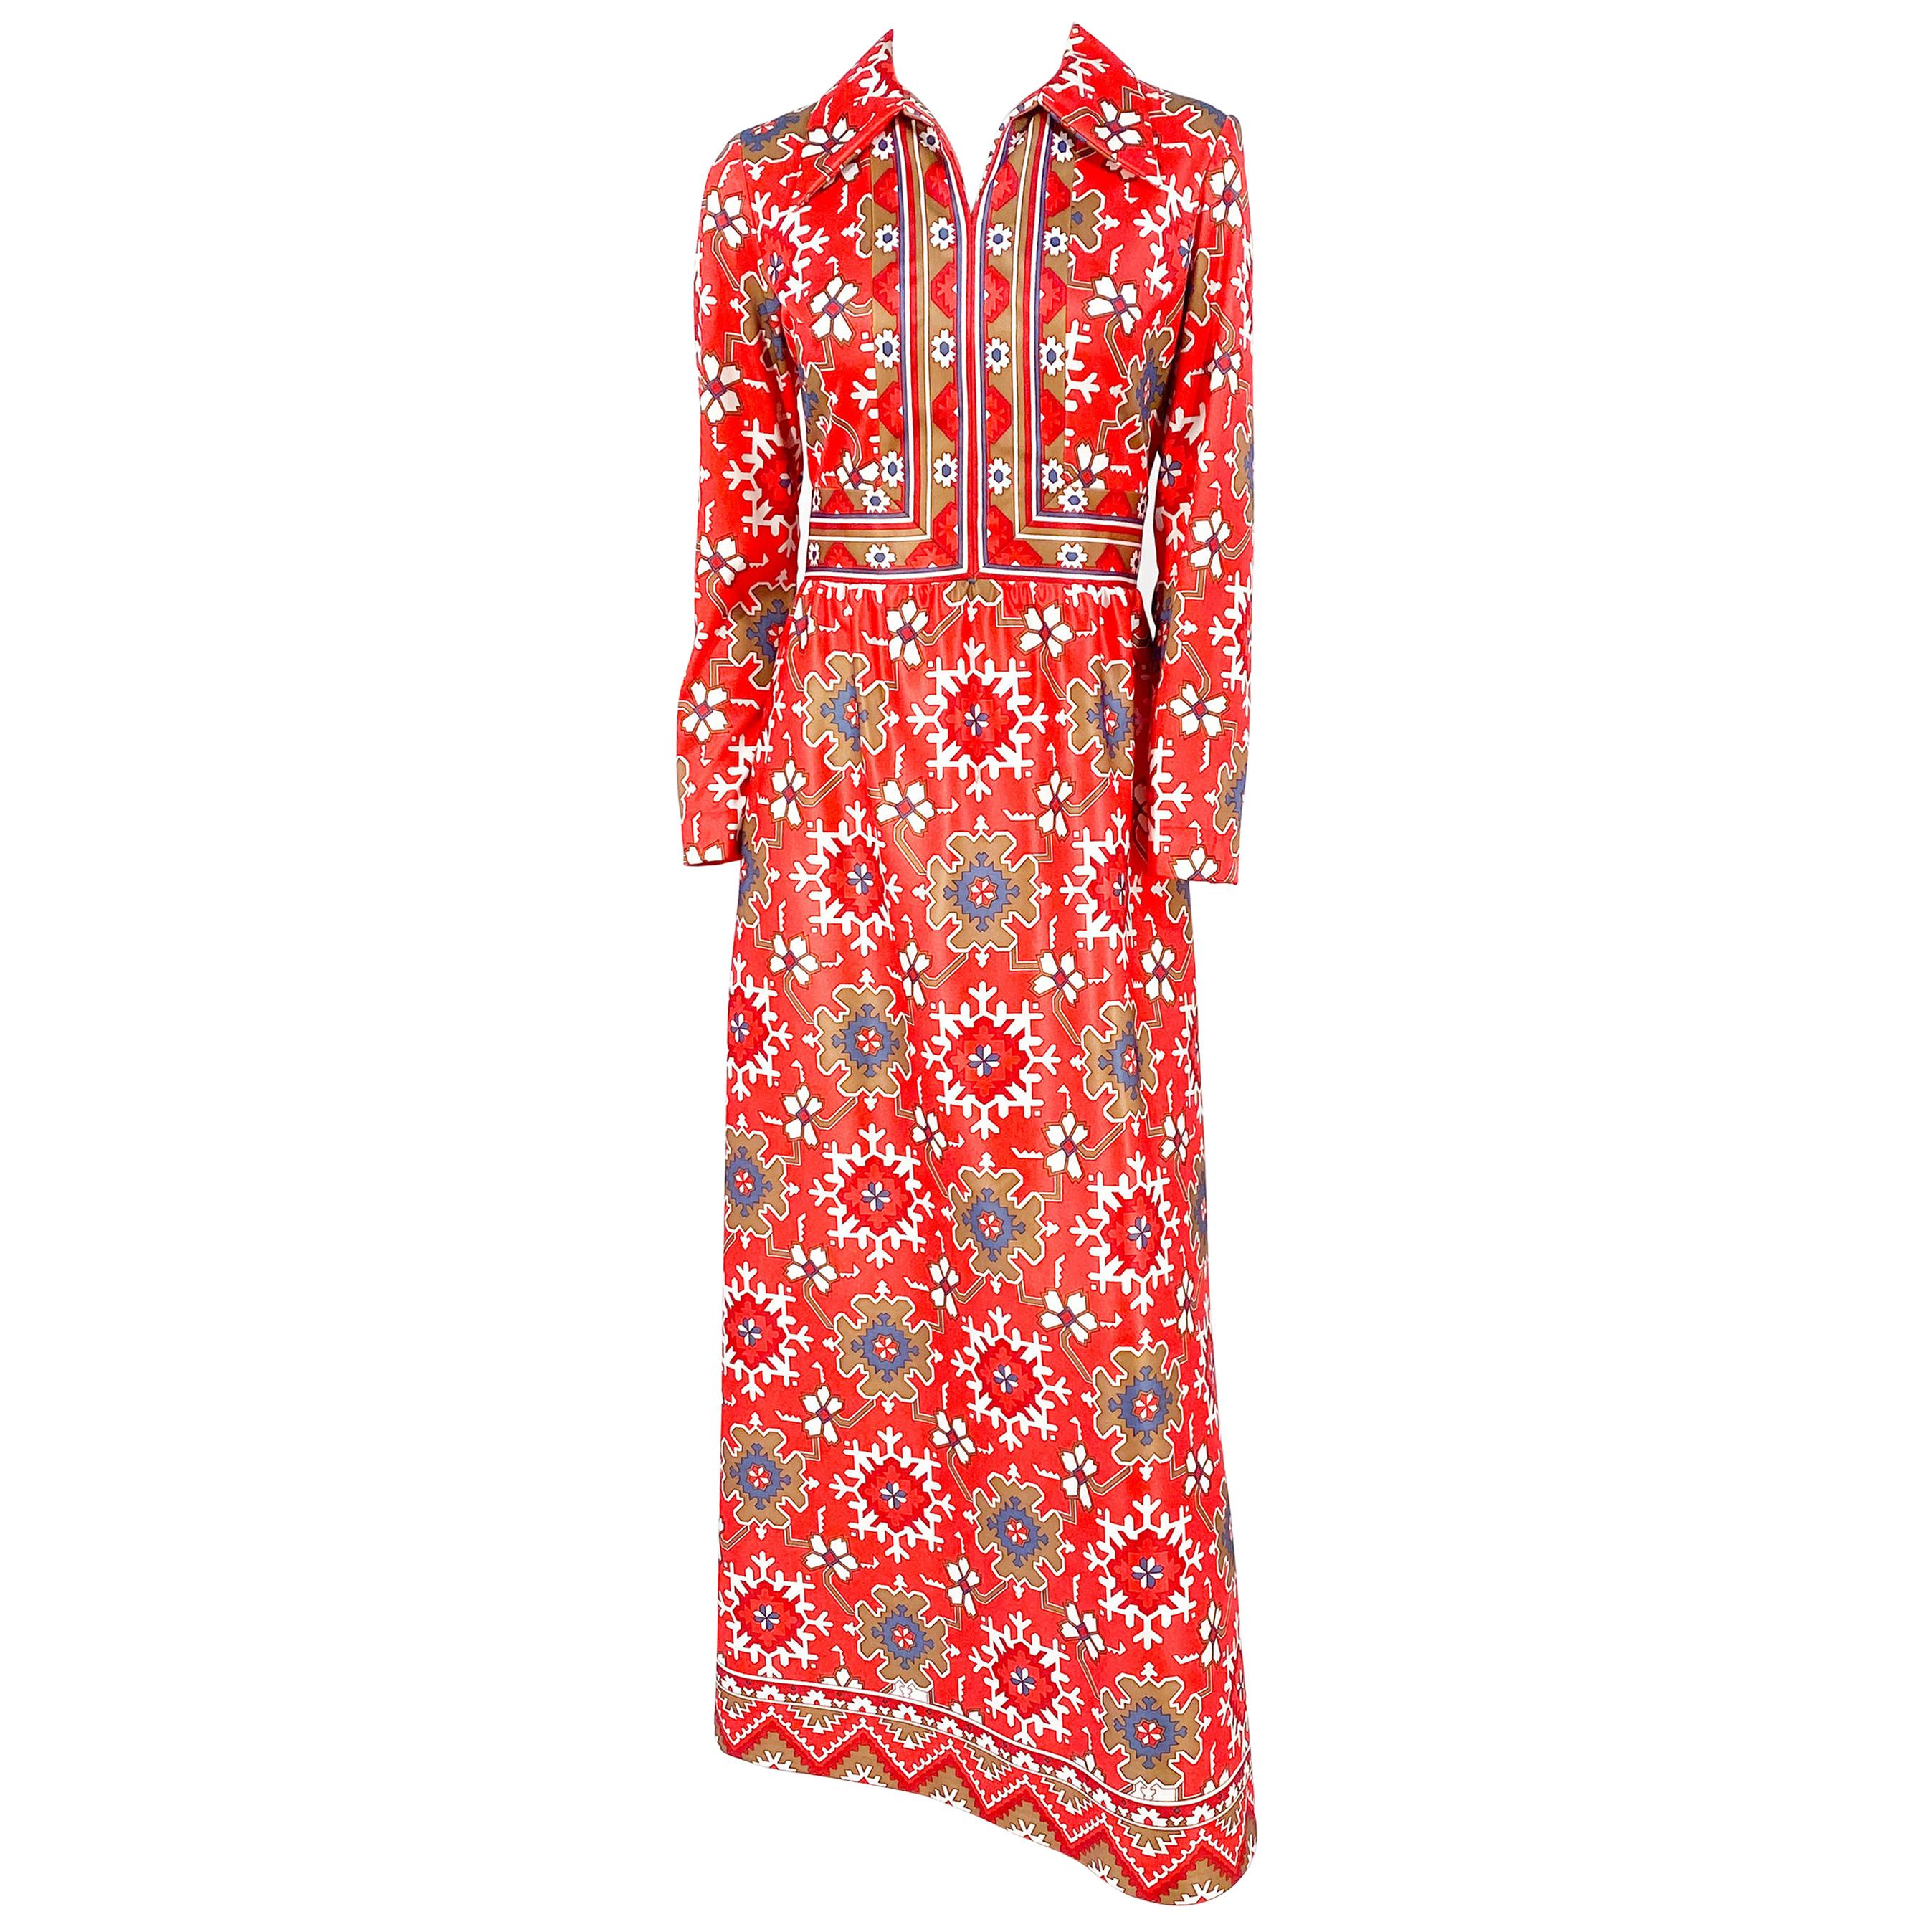 1970s Coral and Red Printed Dress with Boarder Accents